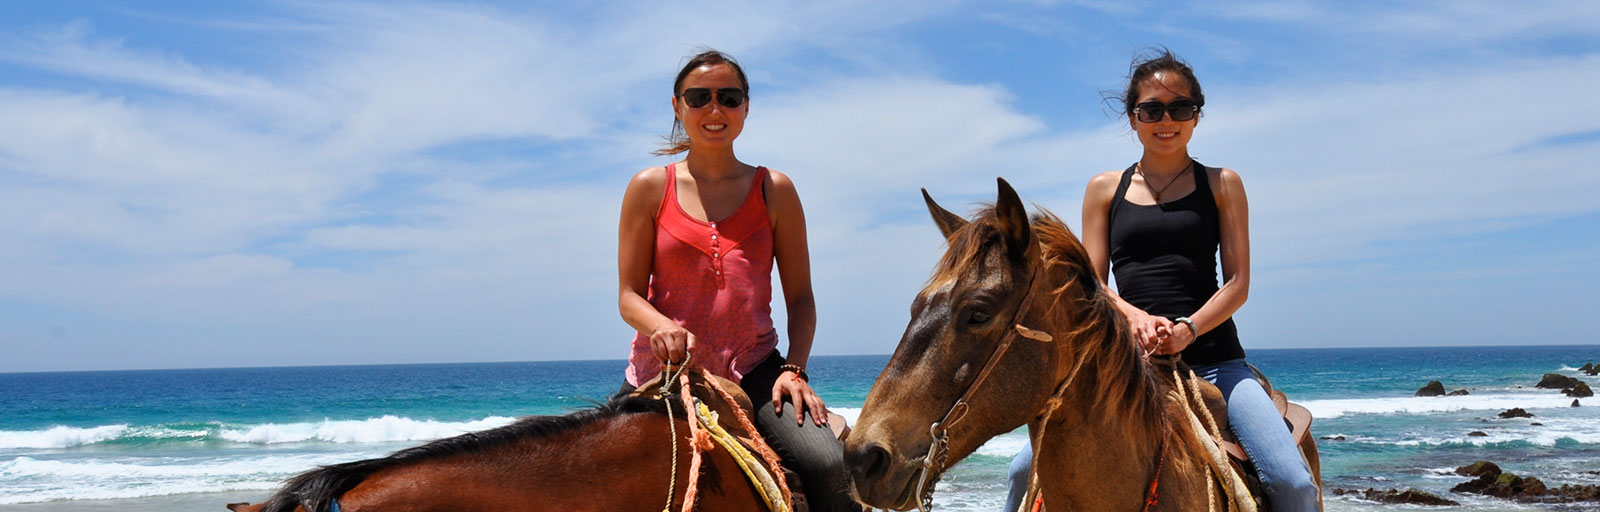 Horseback Riding & Yoga Retreat in Mexico: Friends on a Ride